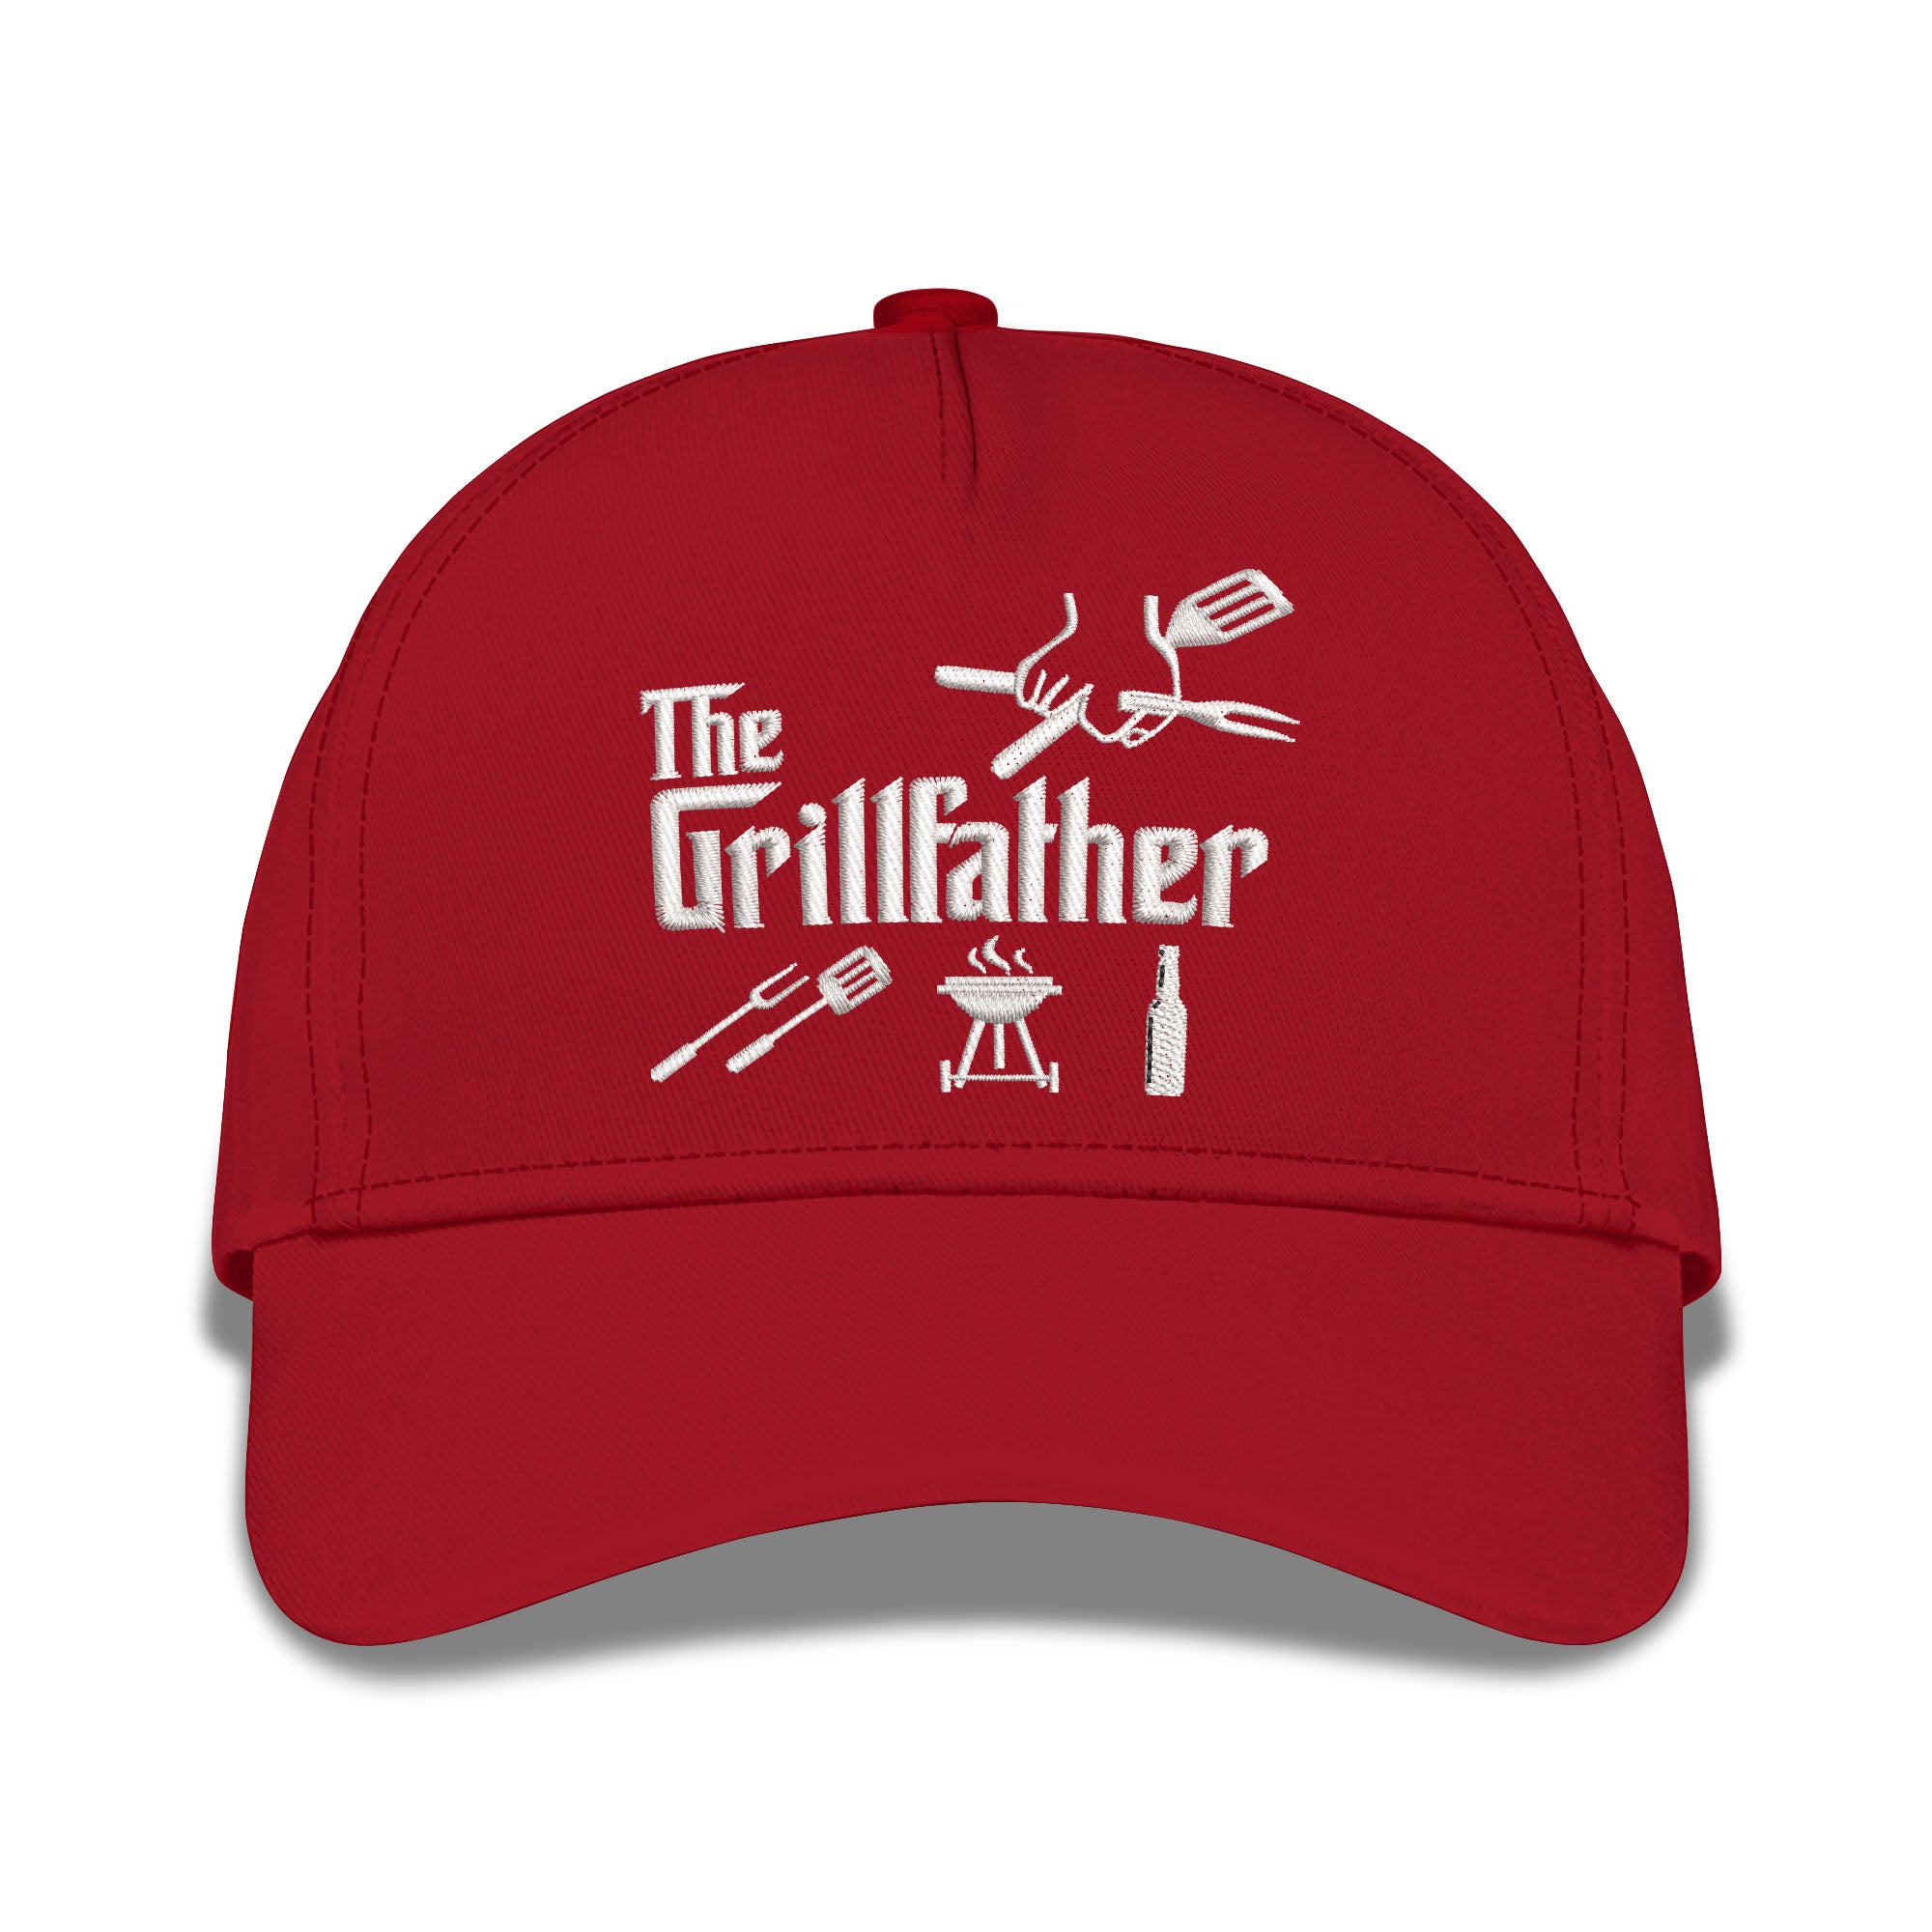 The GrillFather Embroidered Baseball Caps